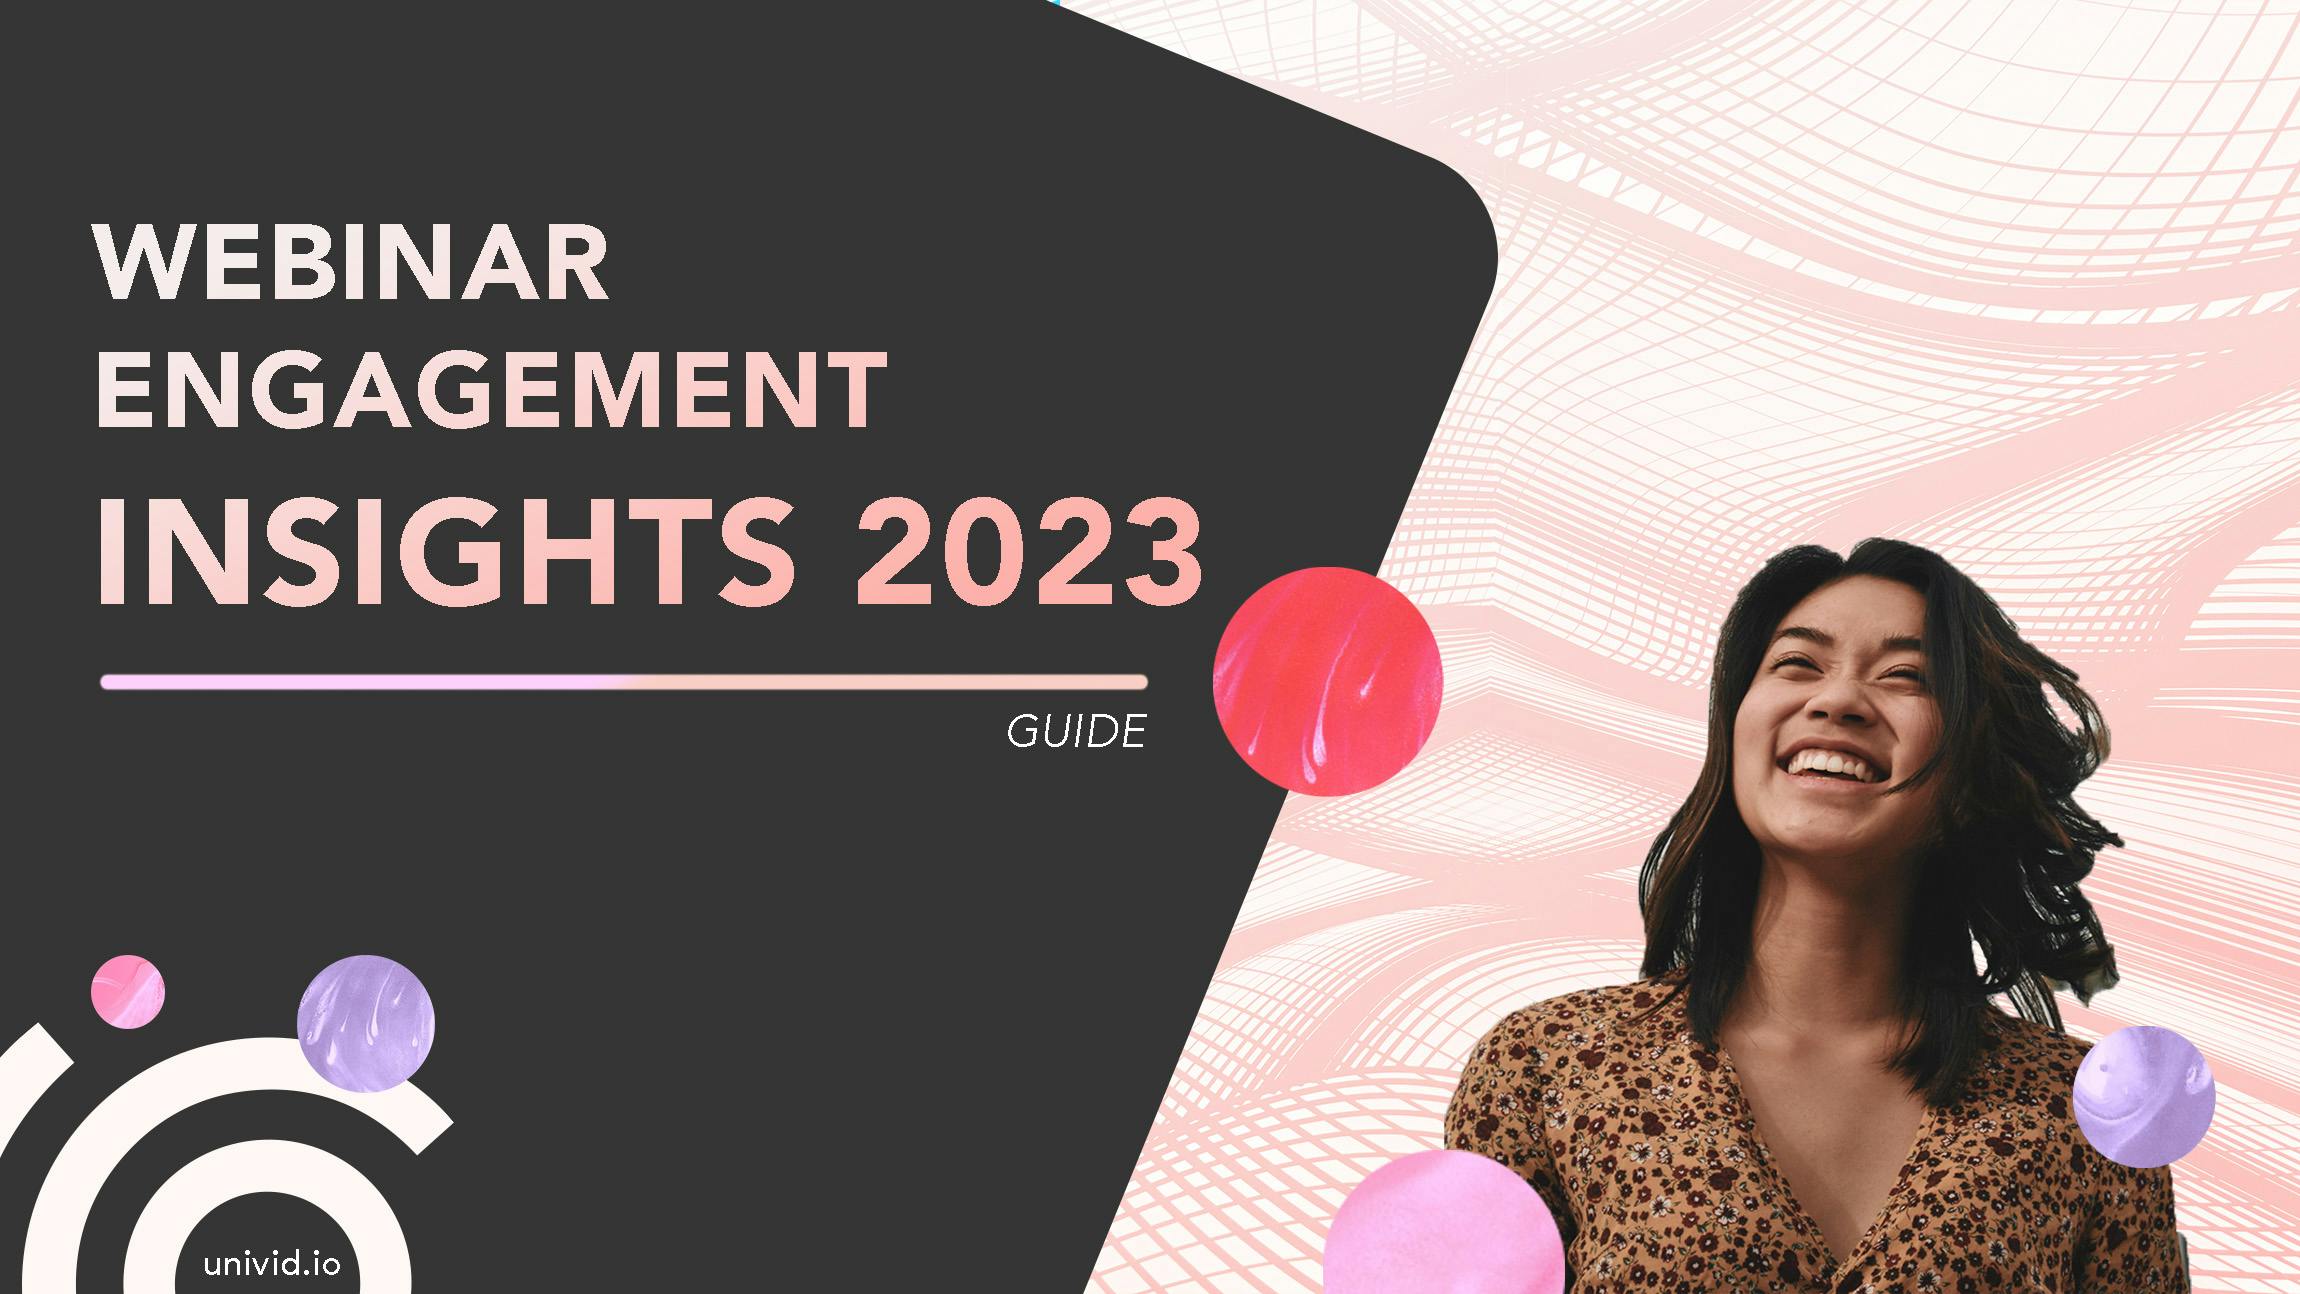 Want to maximize the impact of your webinar efforts? Here are Univid's Webinar Engagement Insights 2023. The 6 best engagement tips, based on 1000s of webinars.